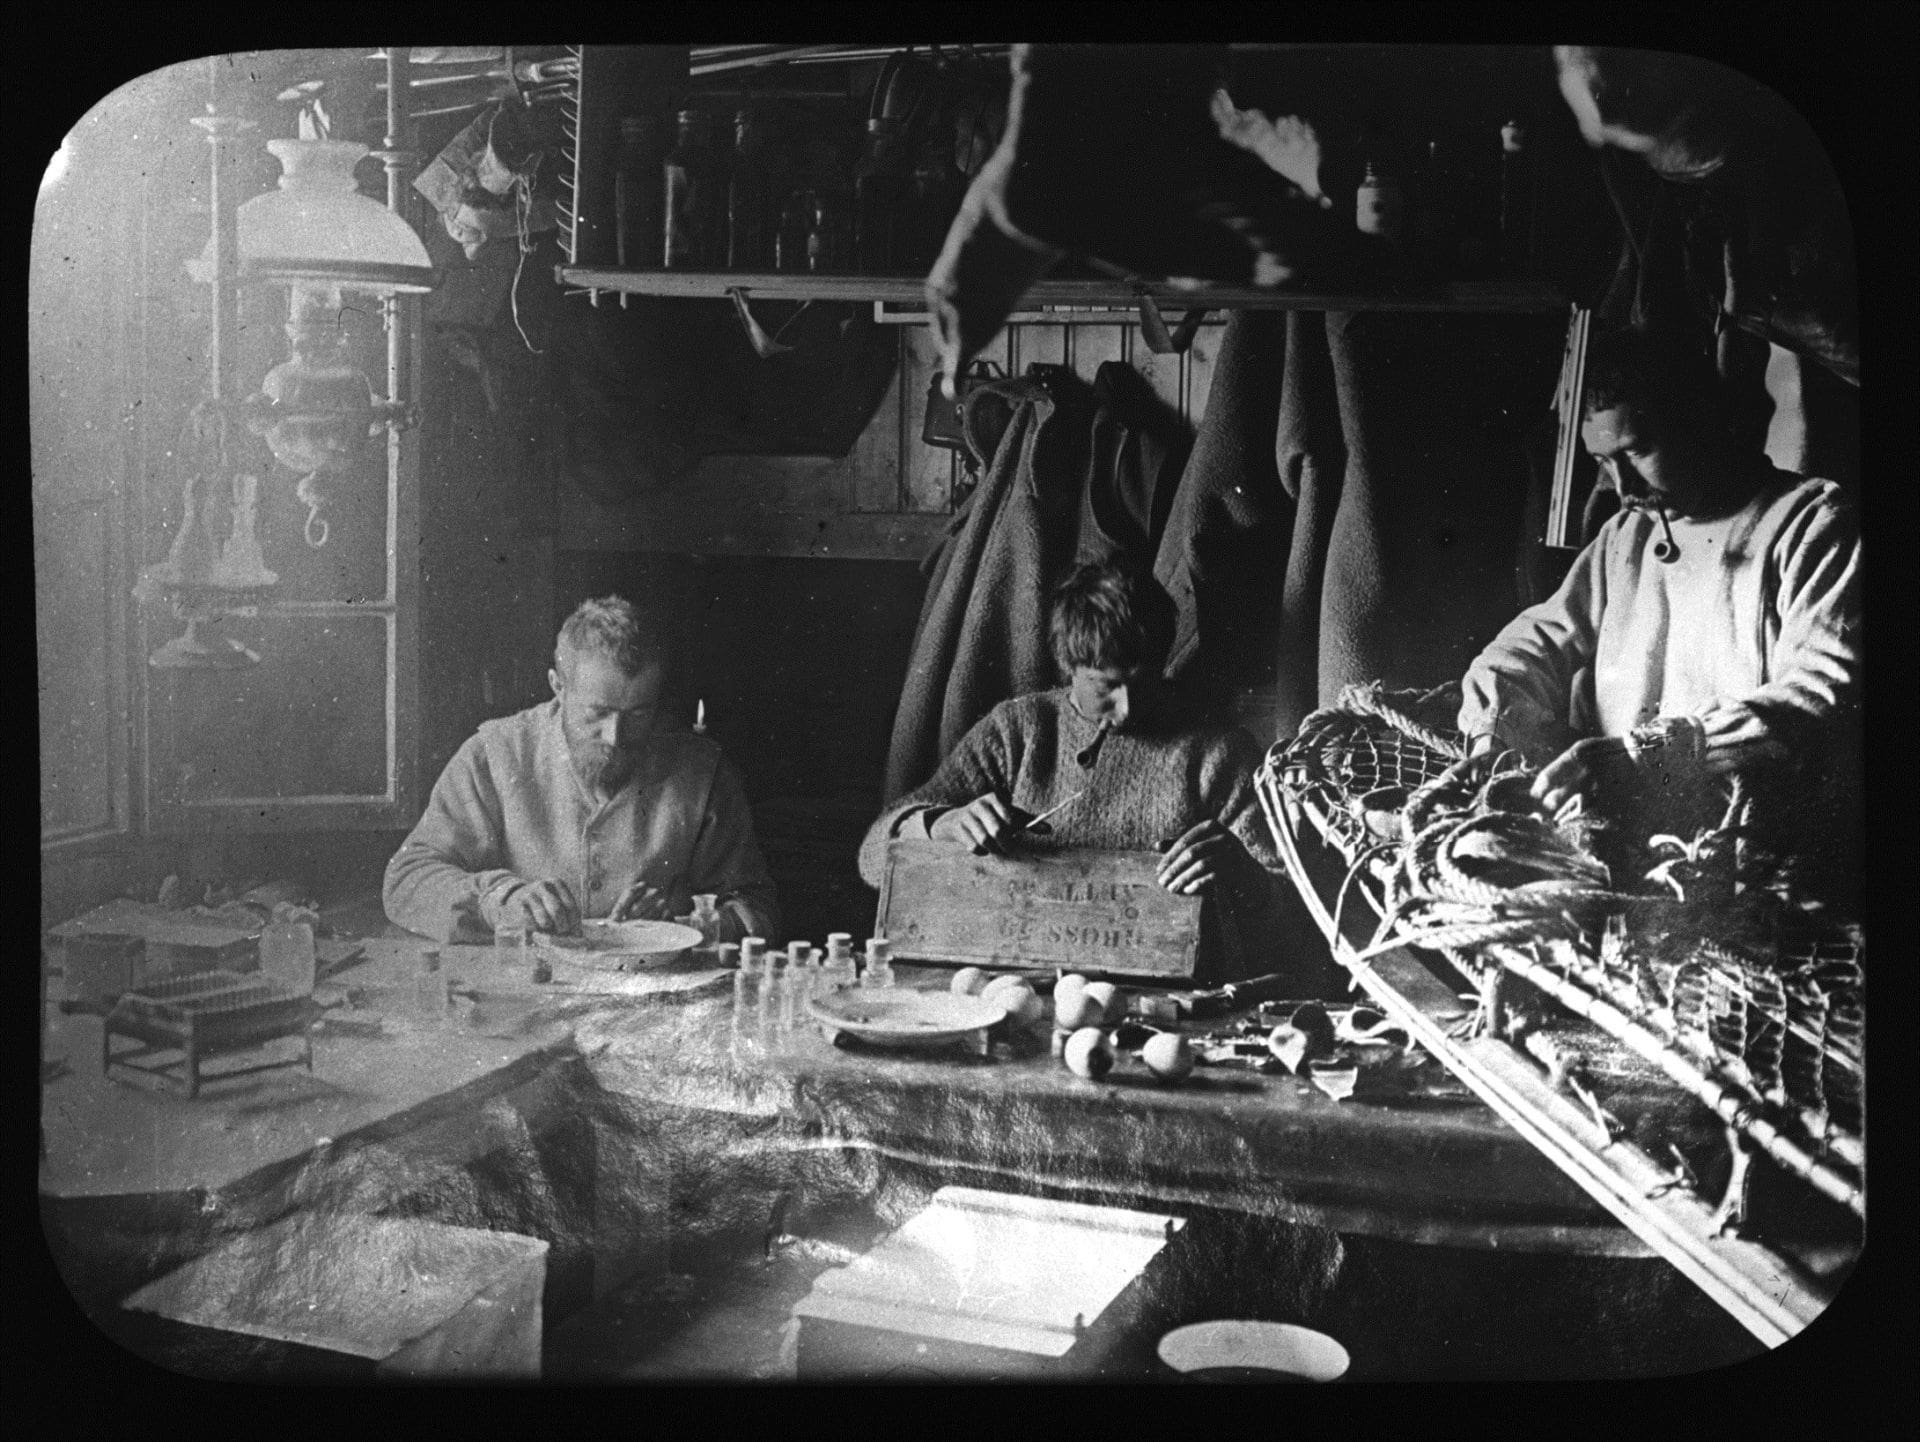 Fougner, Evans and Colbeck working inside the hut in November 1899.